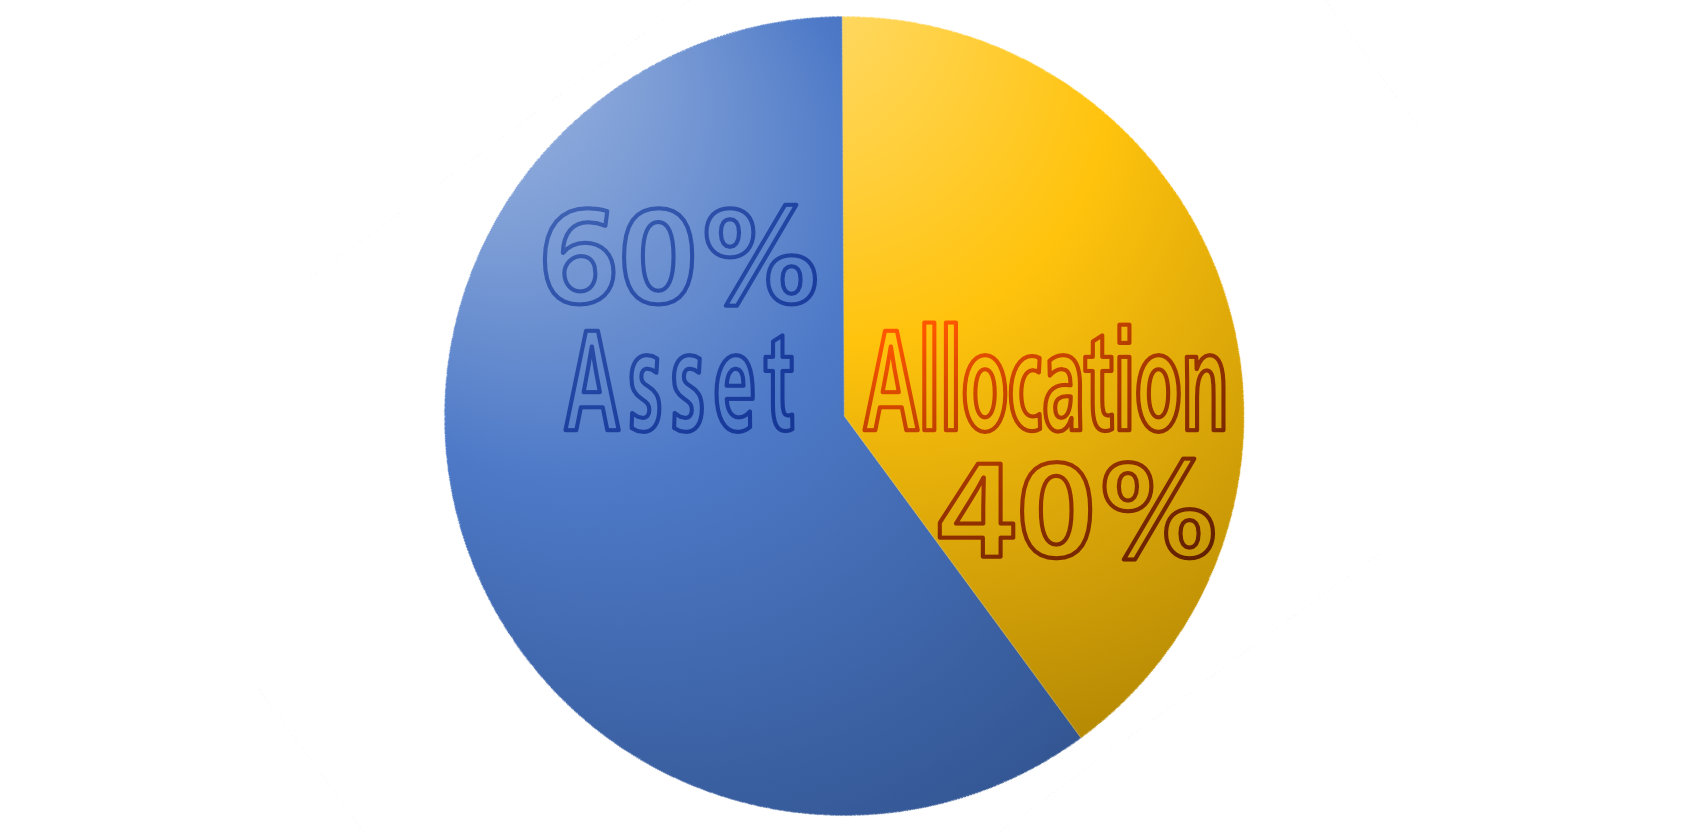 A New Twist on 60/40 Asset Allocation